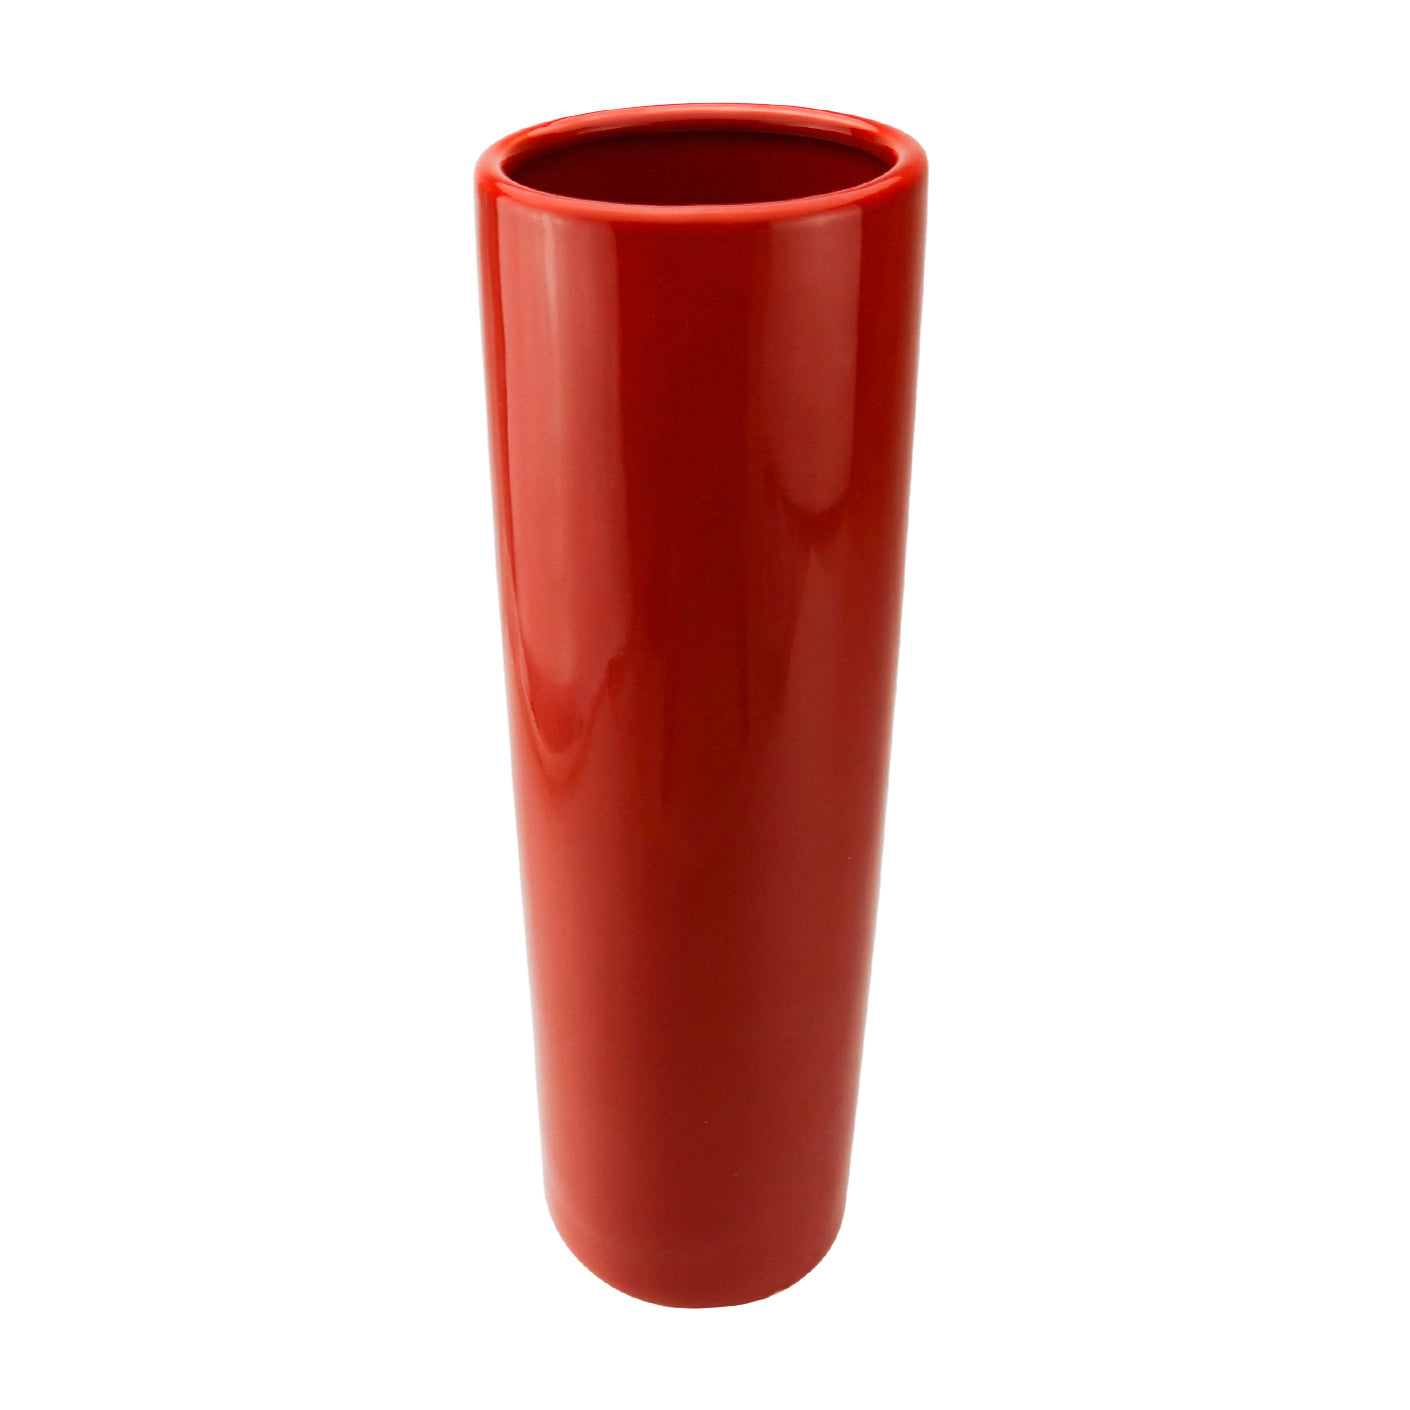 Special selection cylindrical red